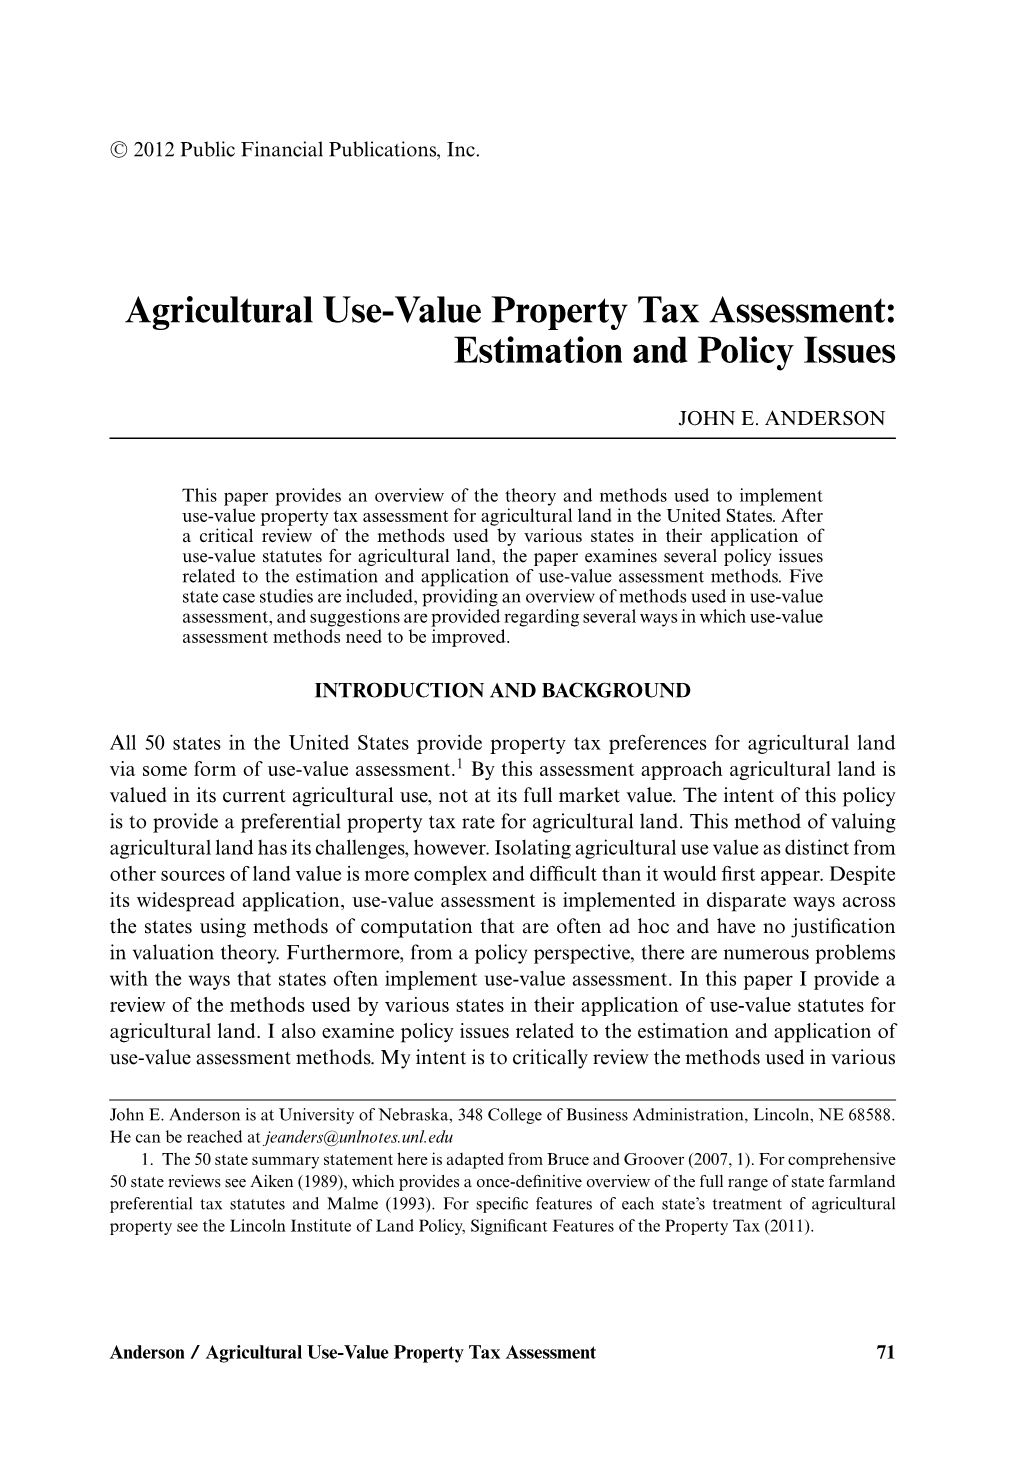 Agricultural Use-Value Property Tax Assessment: Estimation and Policy Issues